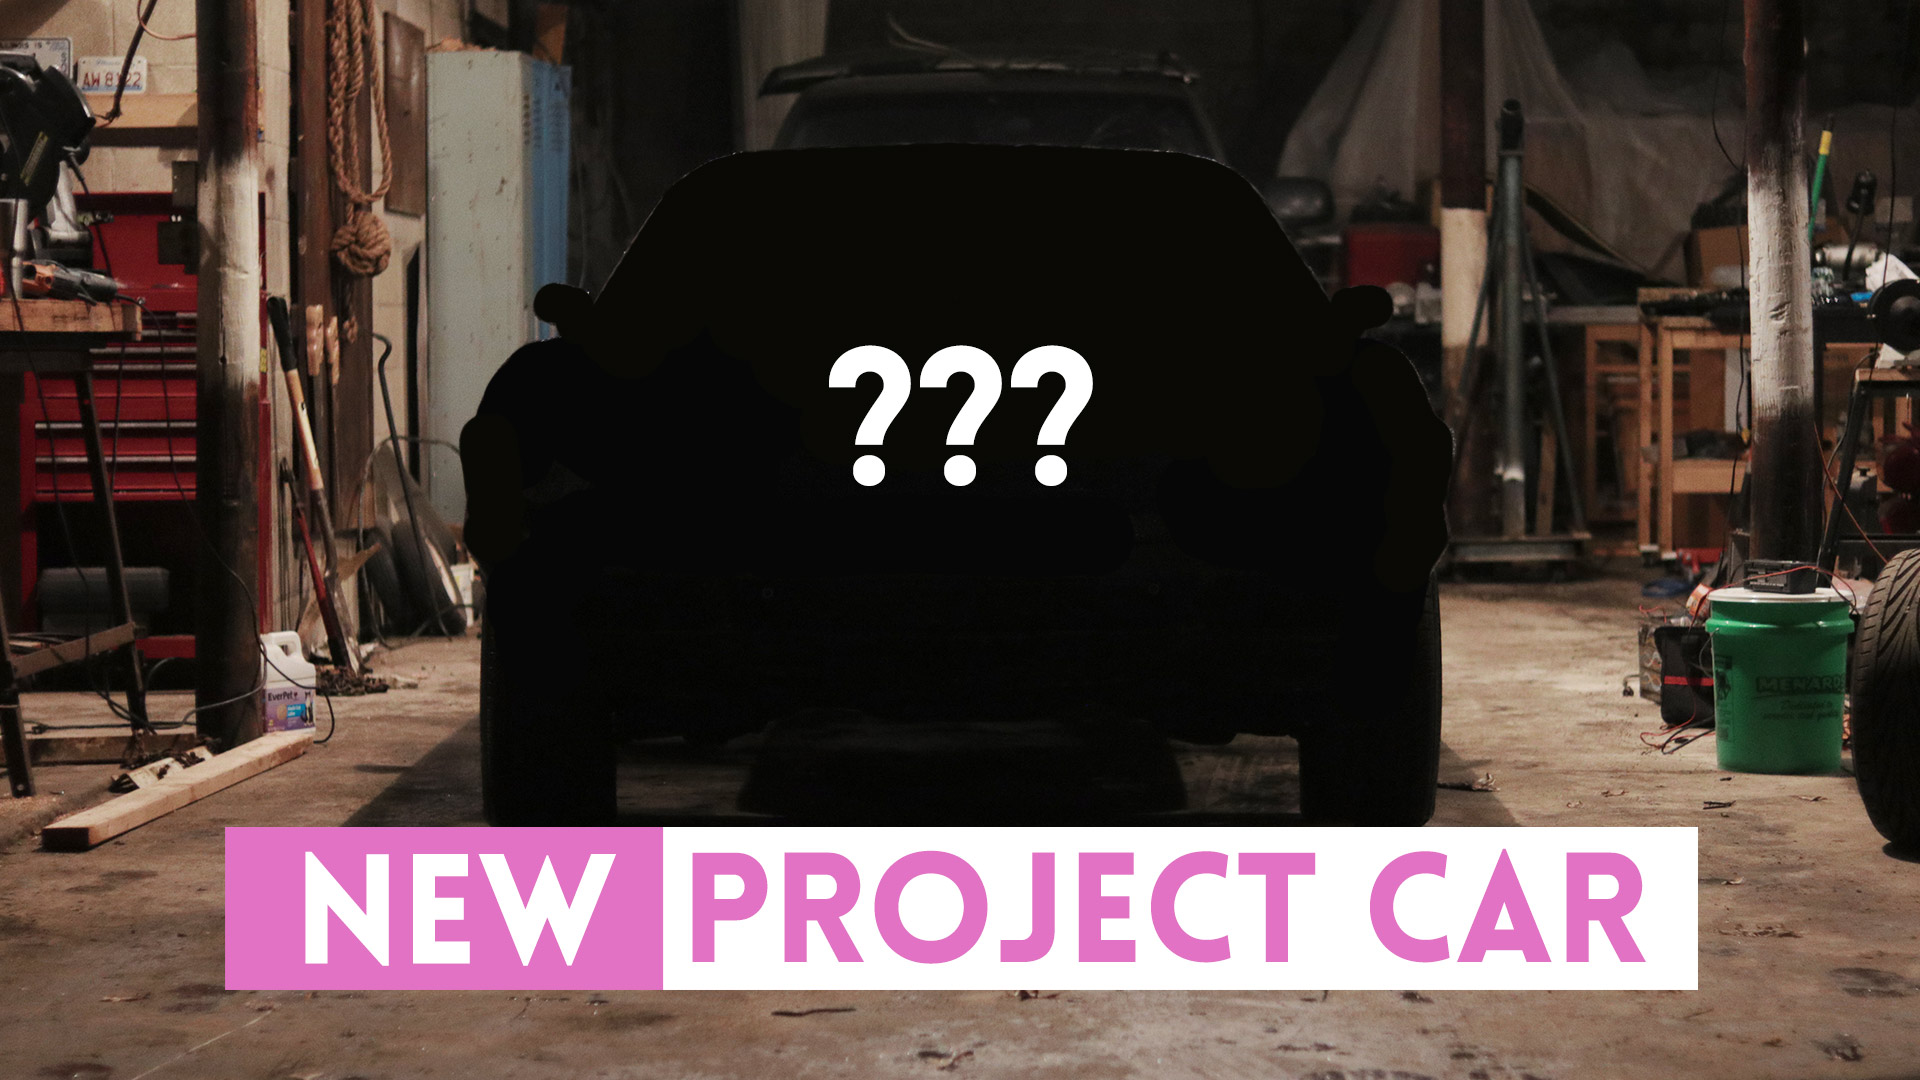 NEW PROJECT CAR reveal